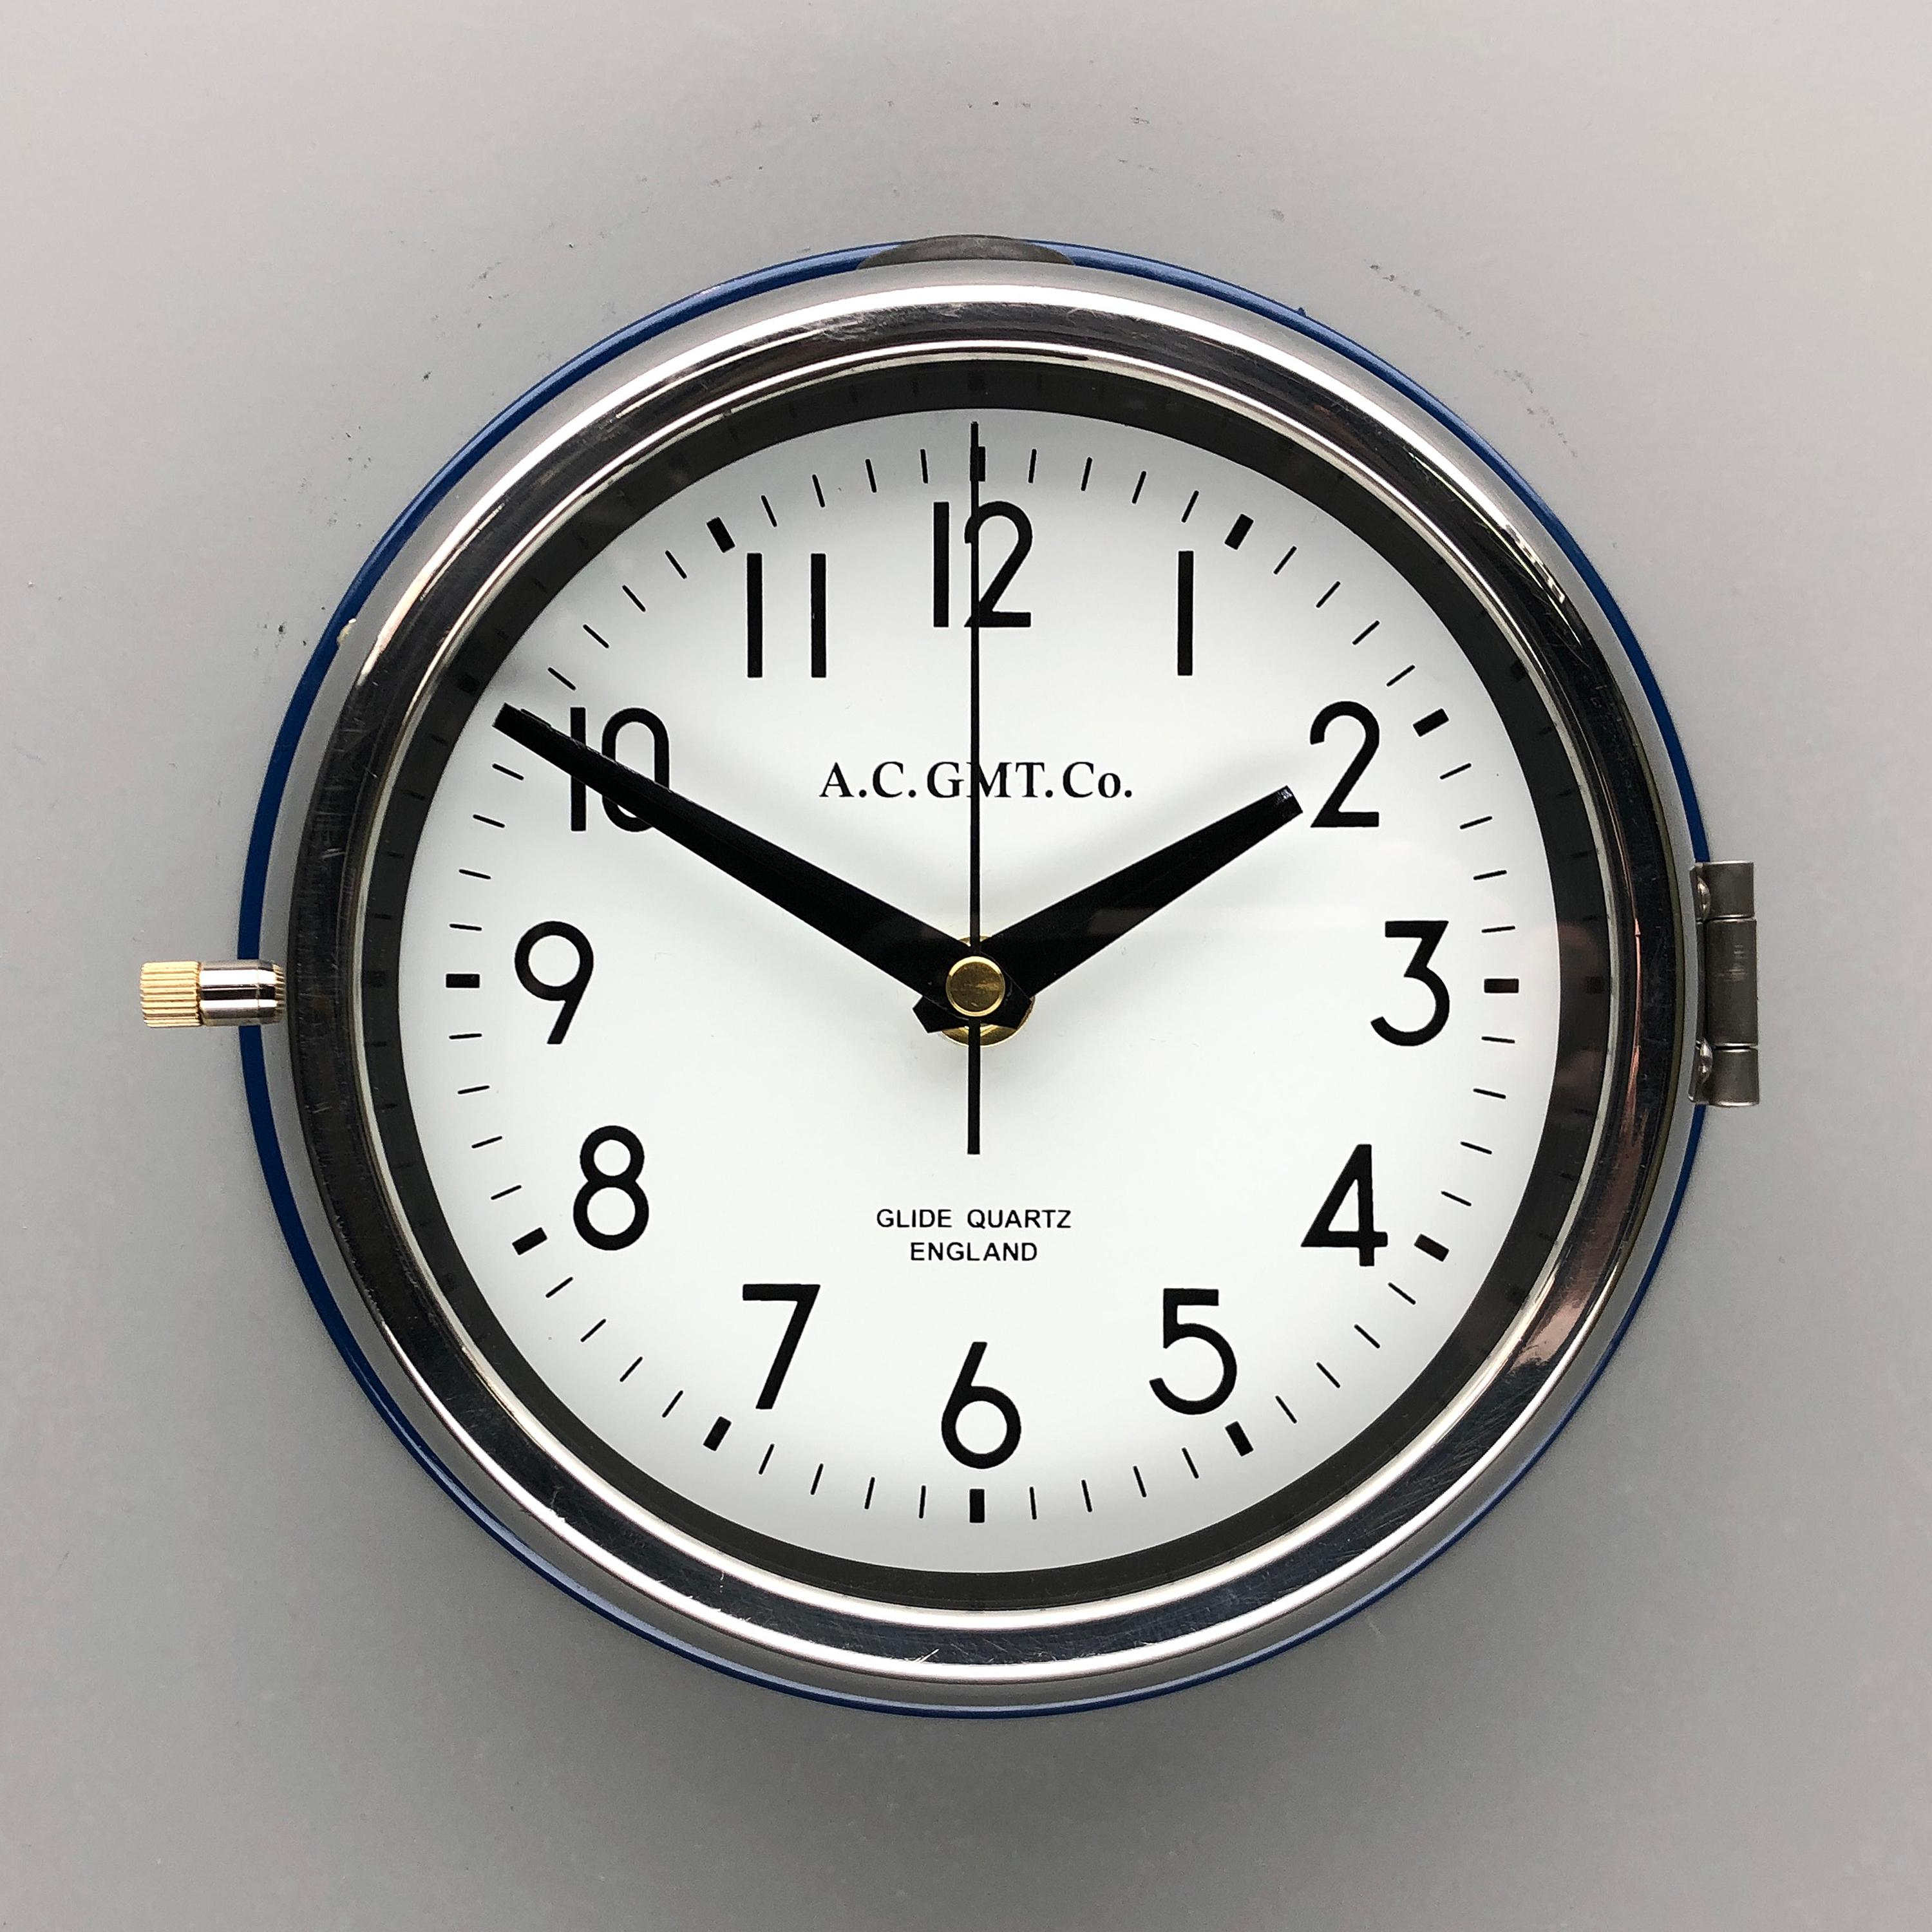 1970s British Classic Blue & Chrome Ac Gmt Co. Industrial Wall Clock White Dial In Excellent Condition For Sale In Leicester, Leicestershire